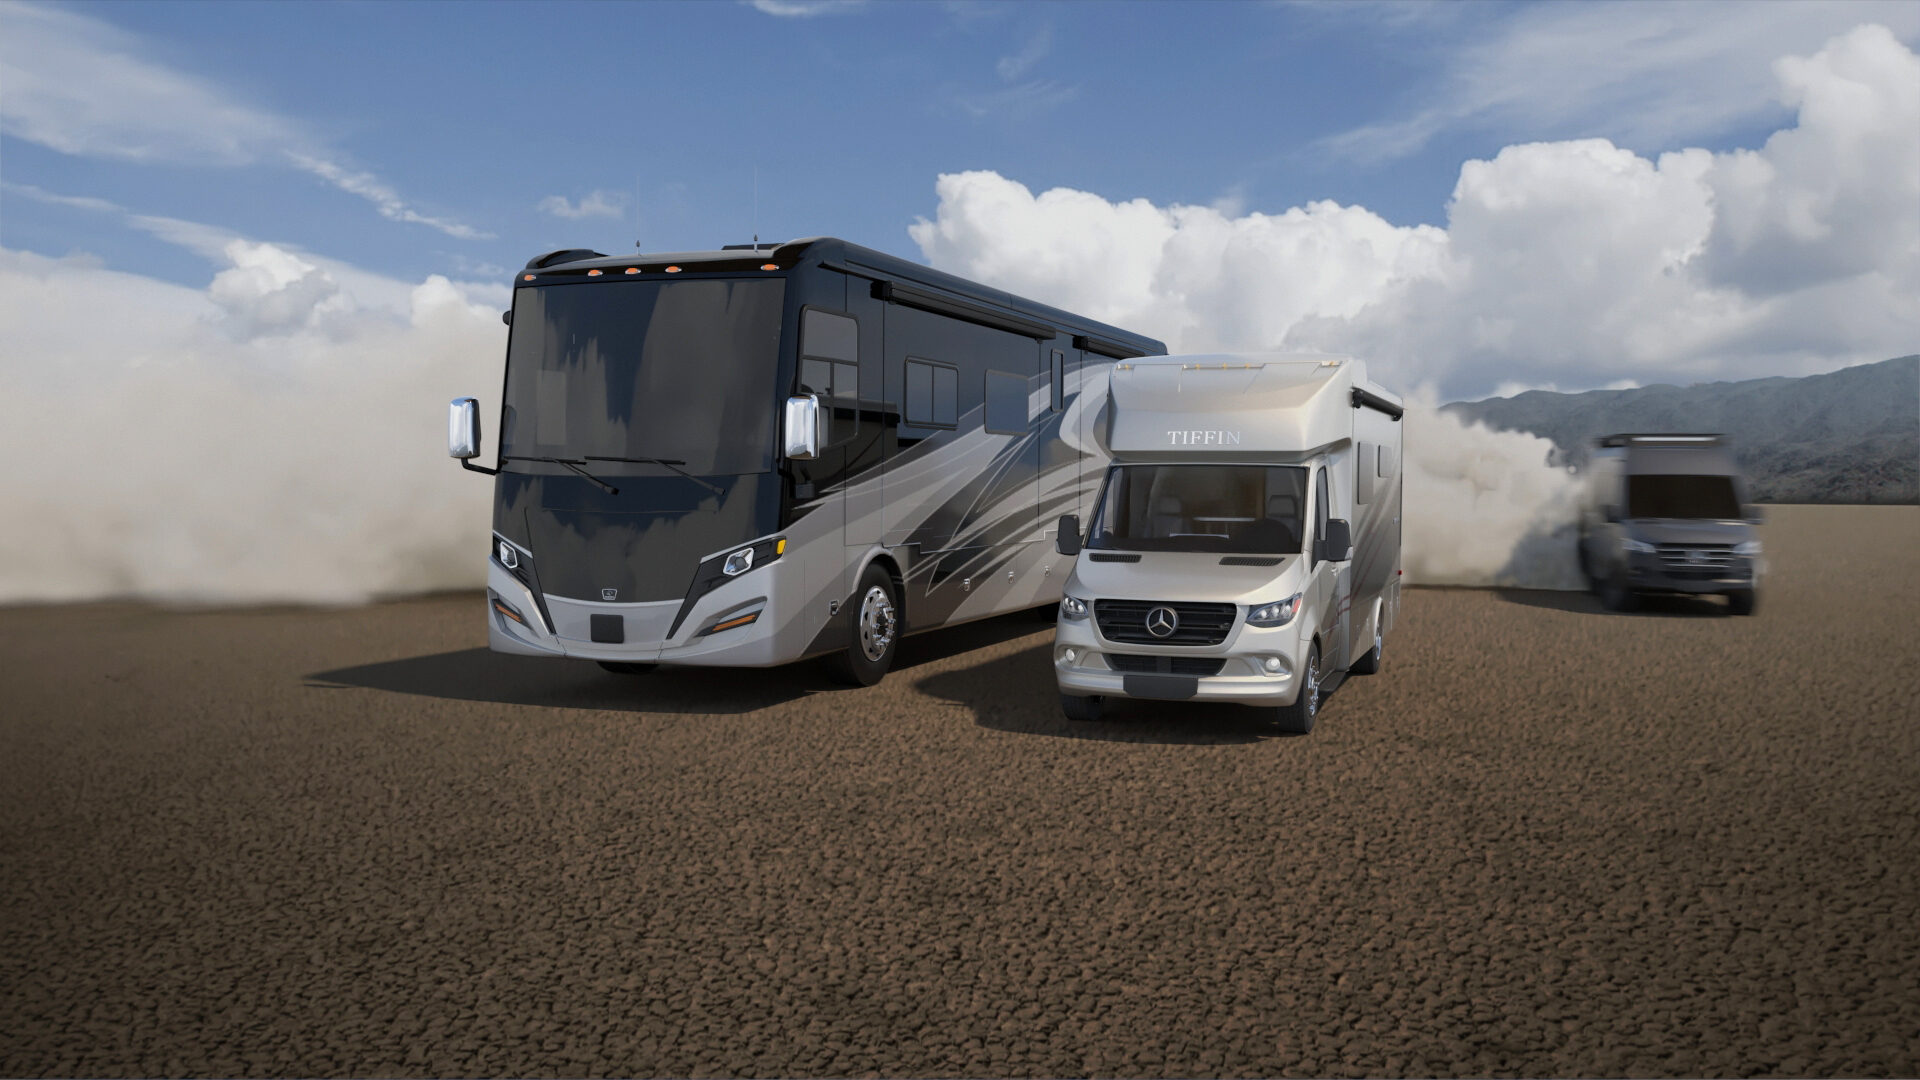 Animation and 3D bring a new kind of RV to life.